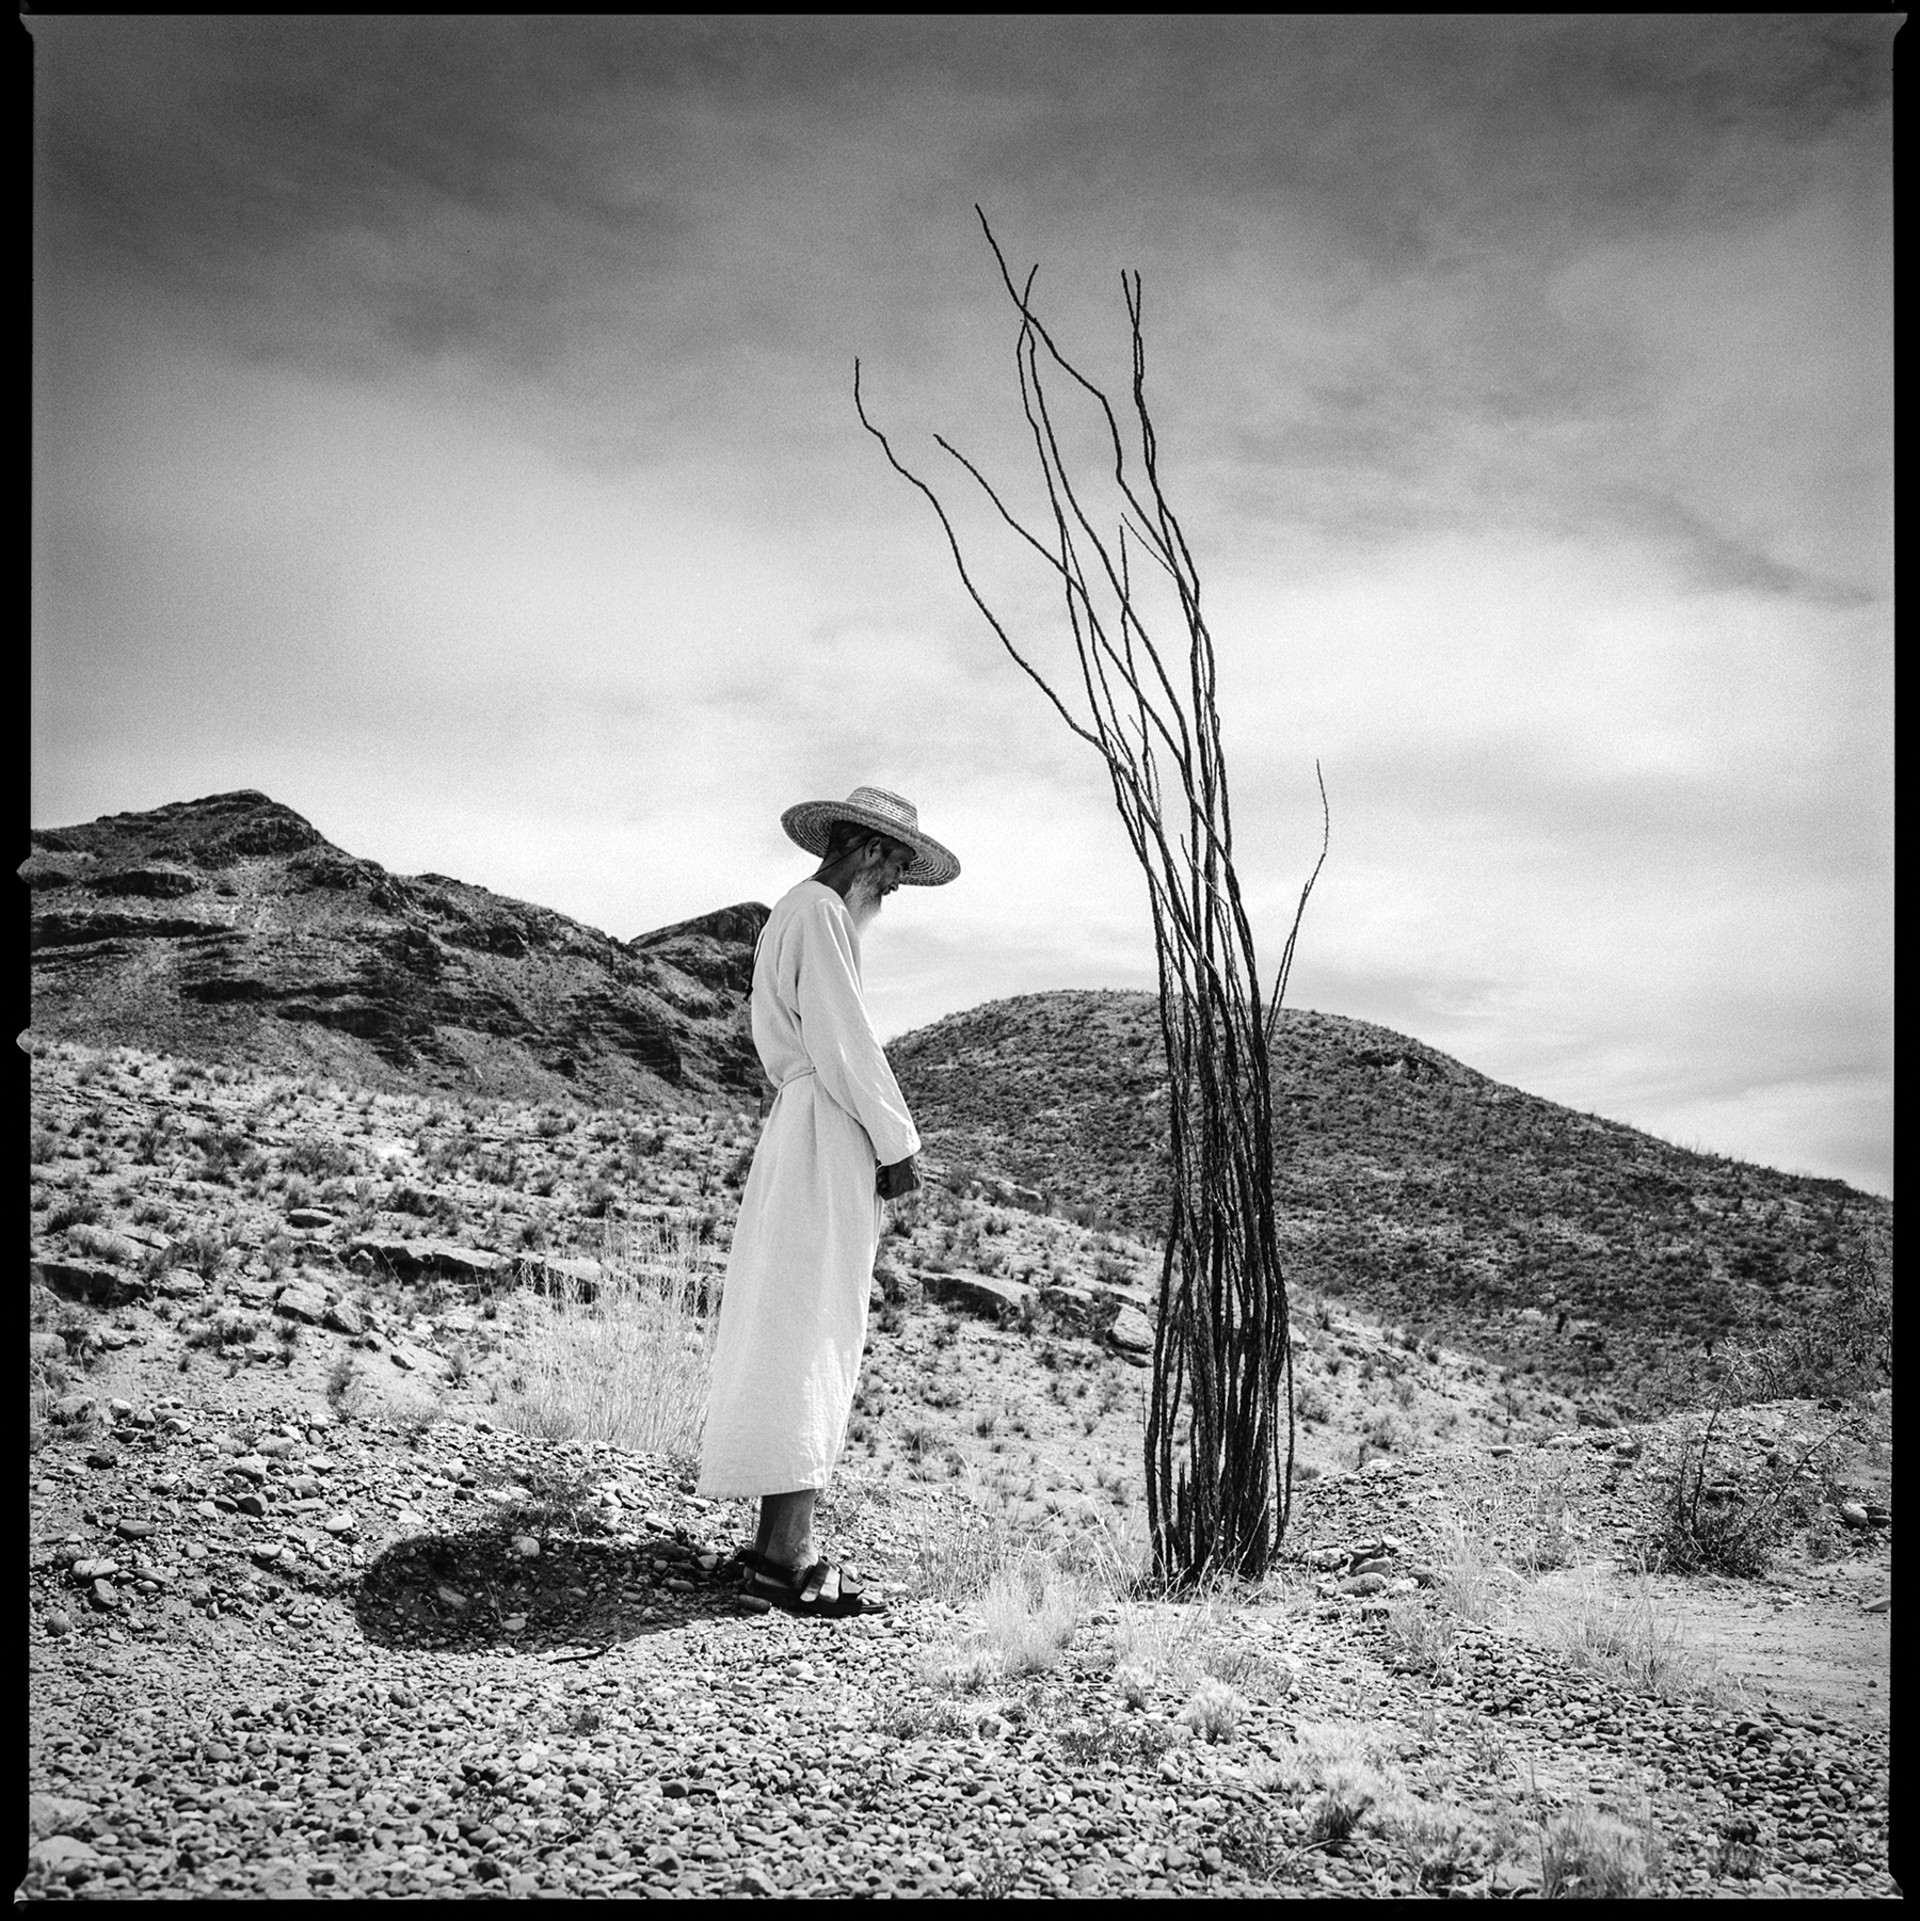 Monk & Ocotillo #2 - Shafter, Texas by Kevin Greenblat